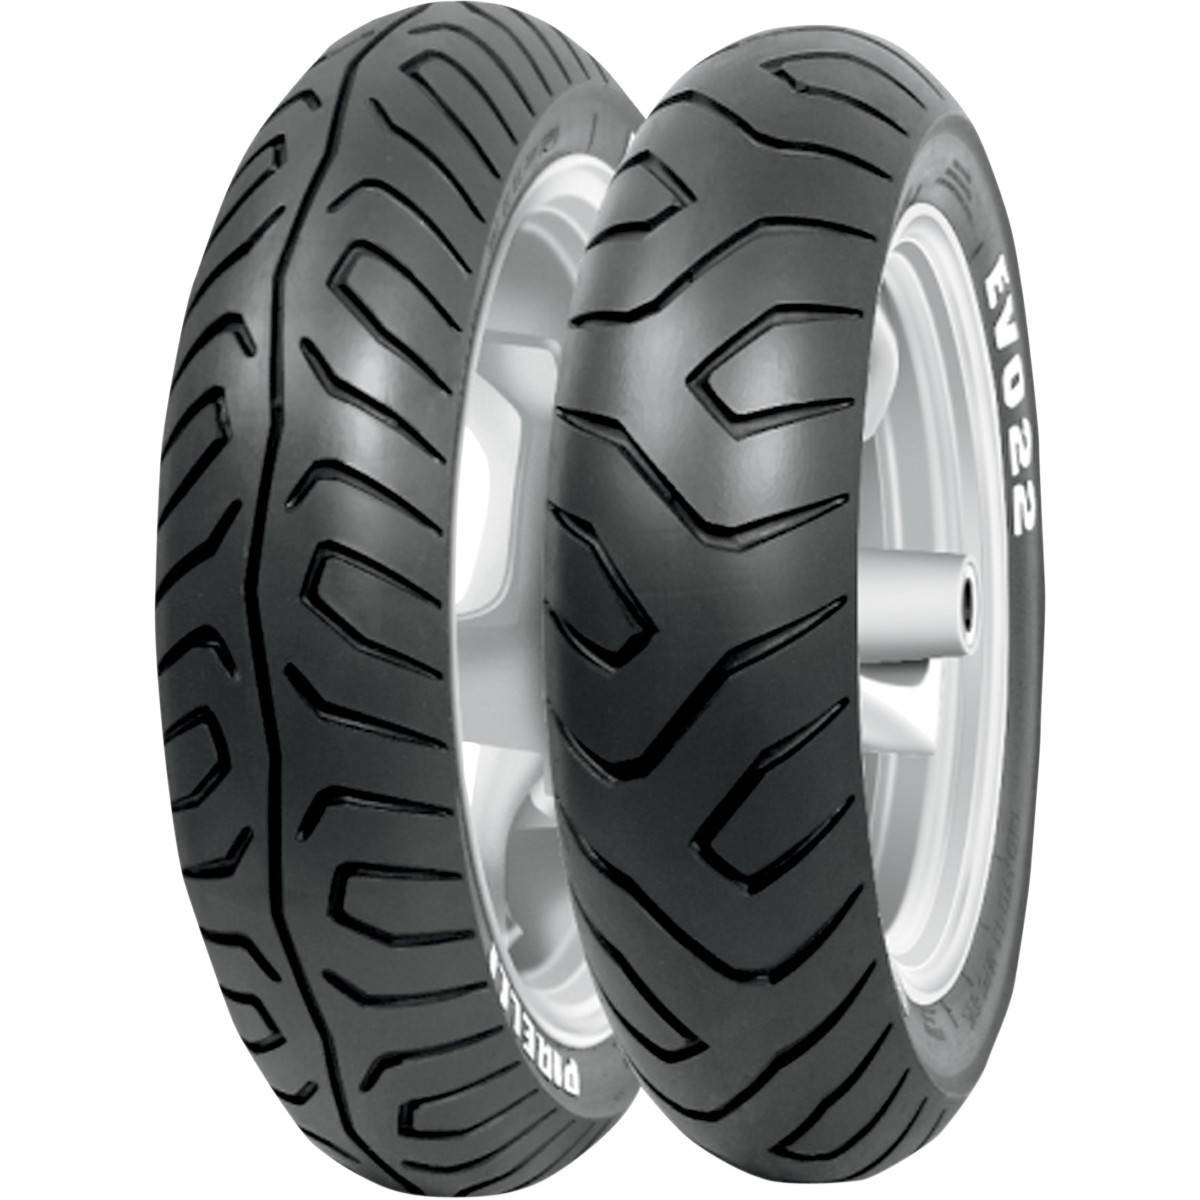 pirelli-evo-21-sport-scooter-front-tire-motorcycle-tires-motorcycle